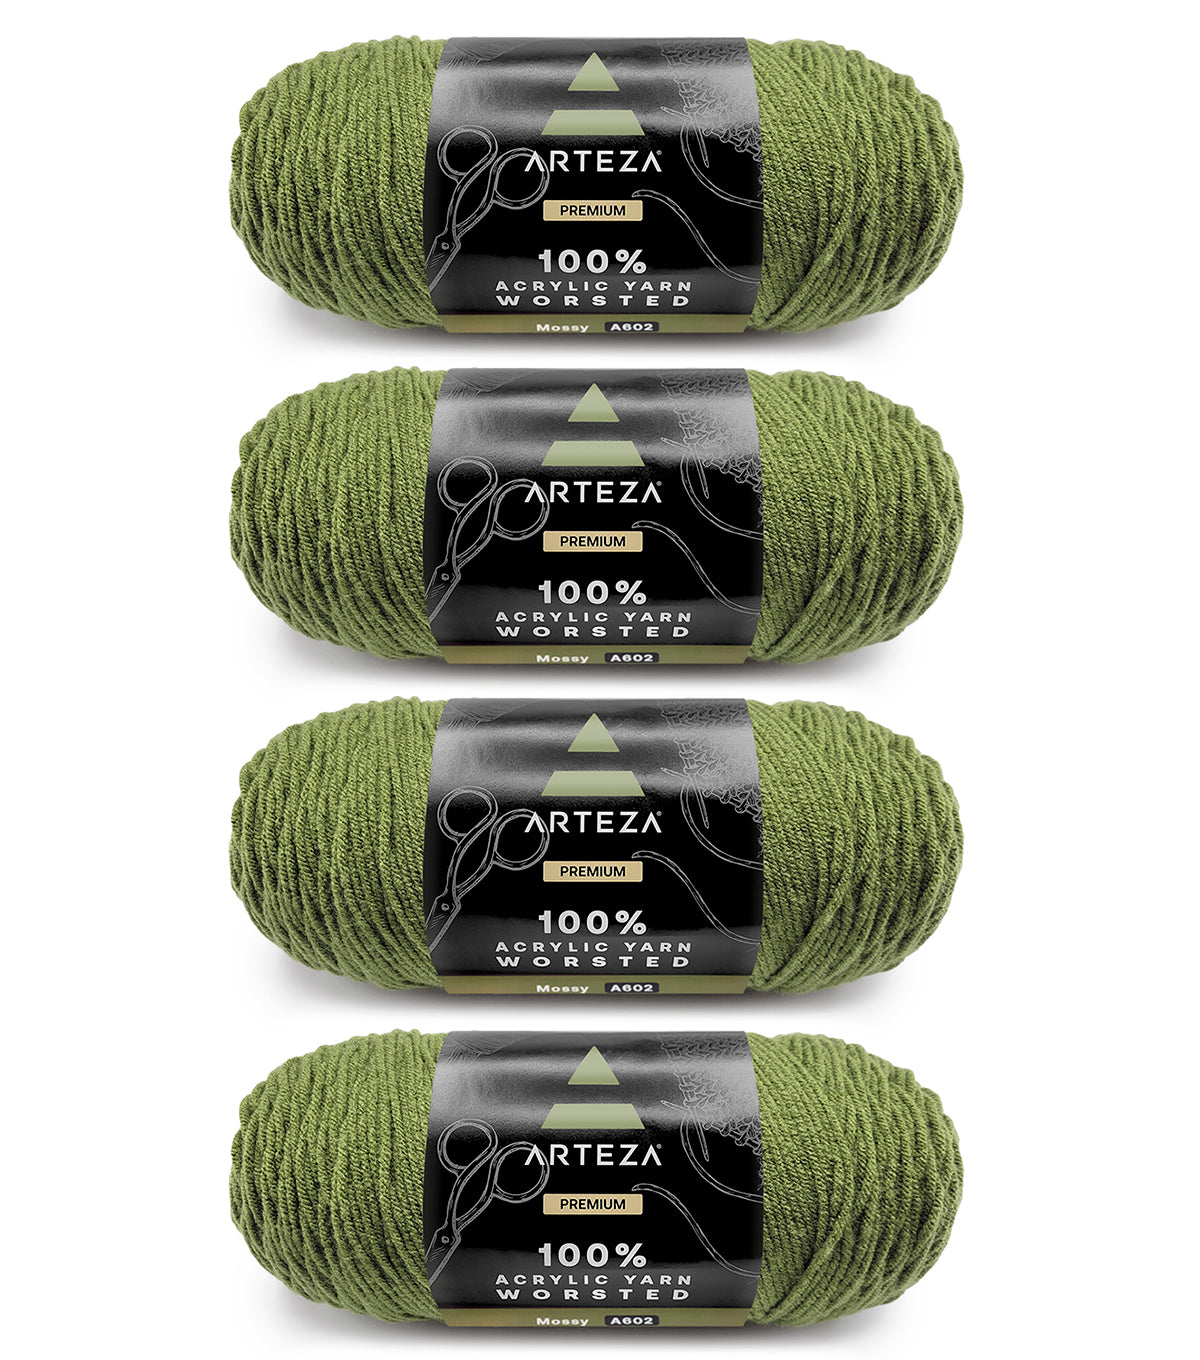 Craftwiz 100% Acrylic Yarn for Crocheting and Knitting - 30x30g Skeins of #4 Worsted Weight Yarn, 1600 Yards of Soft Crochet Yarn, Perfect for